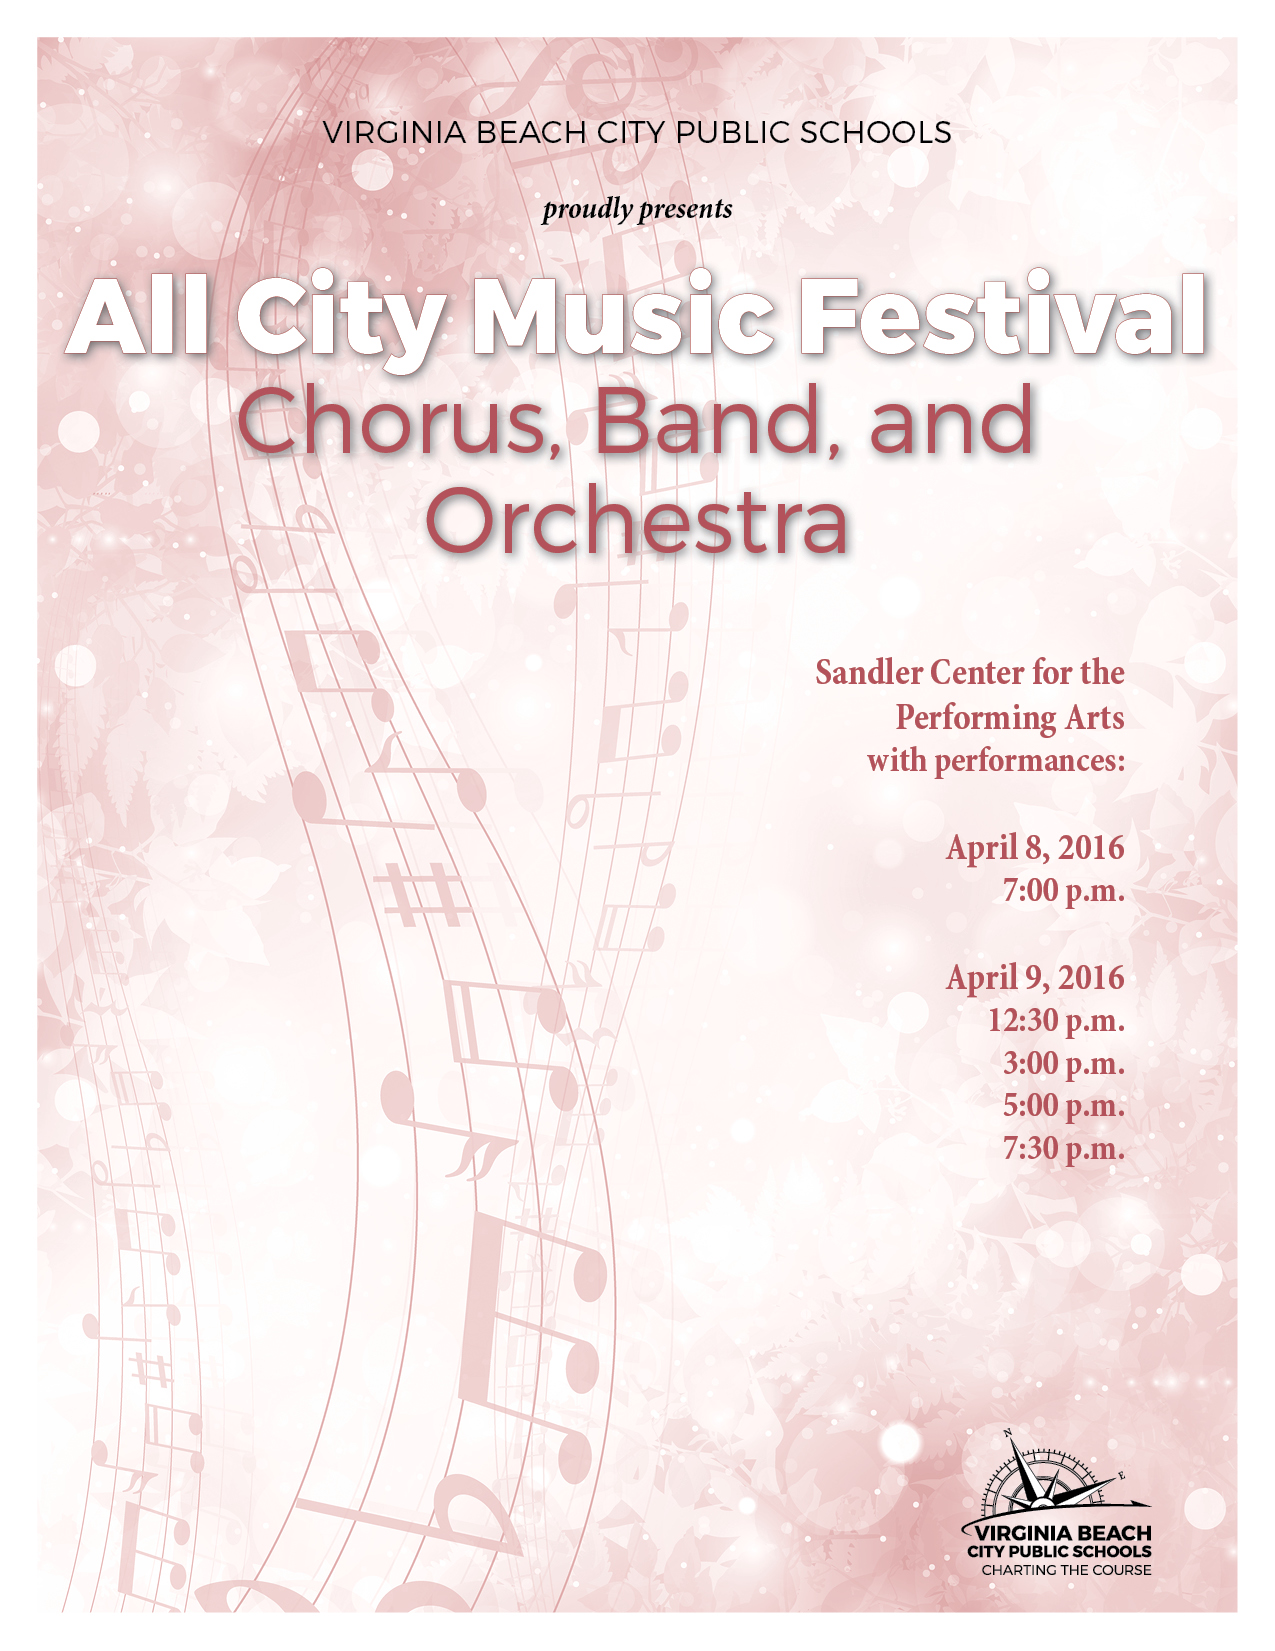 VBCPS hosts All City Music Festival April 89 The Core